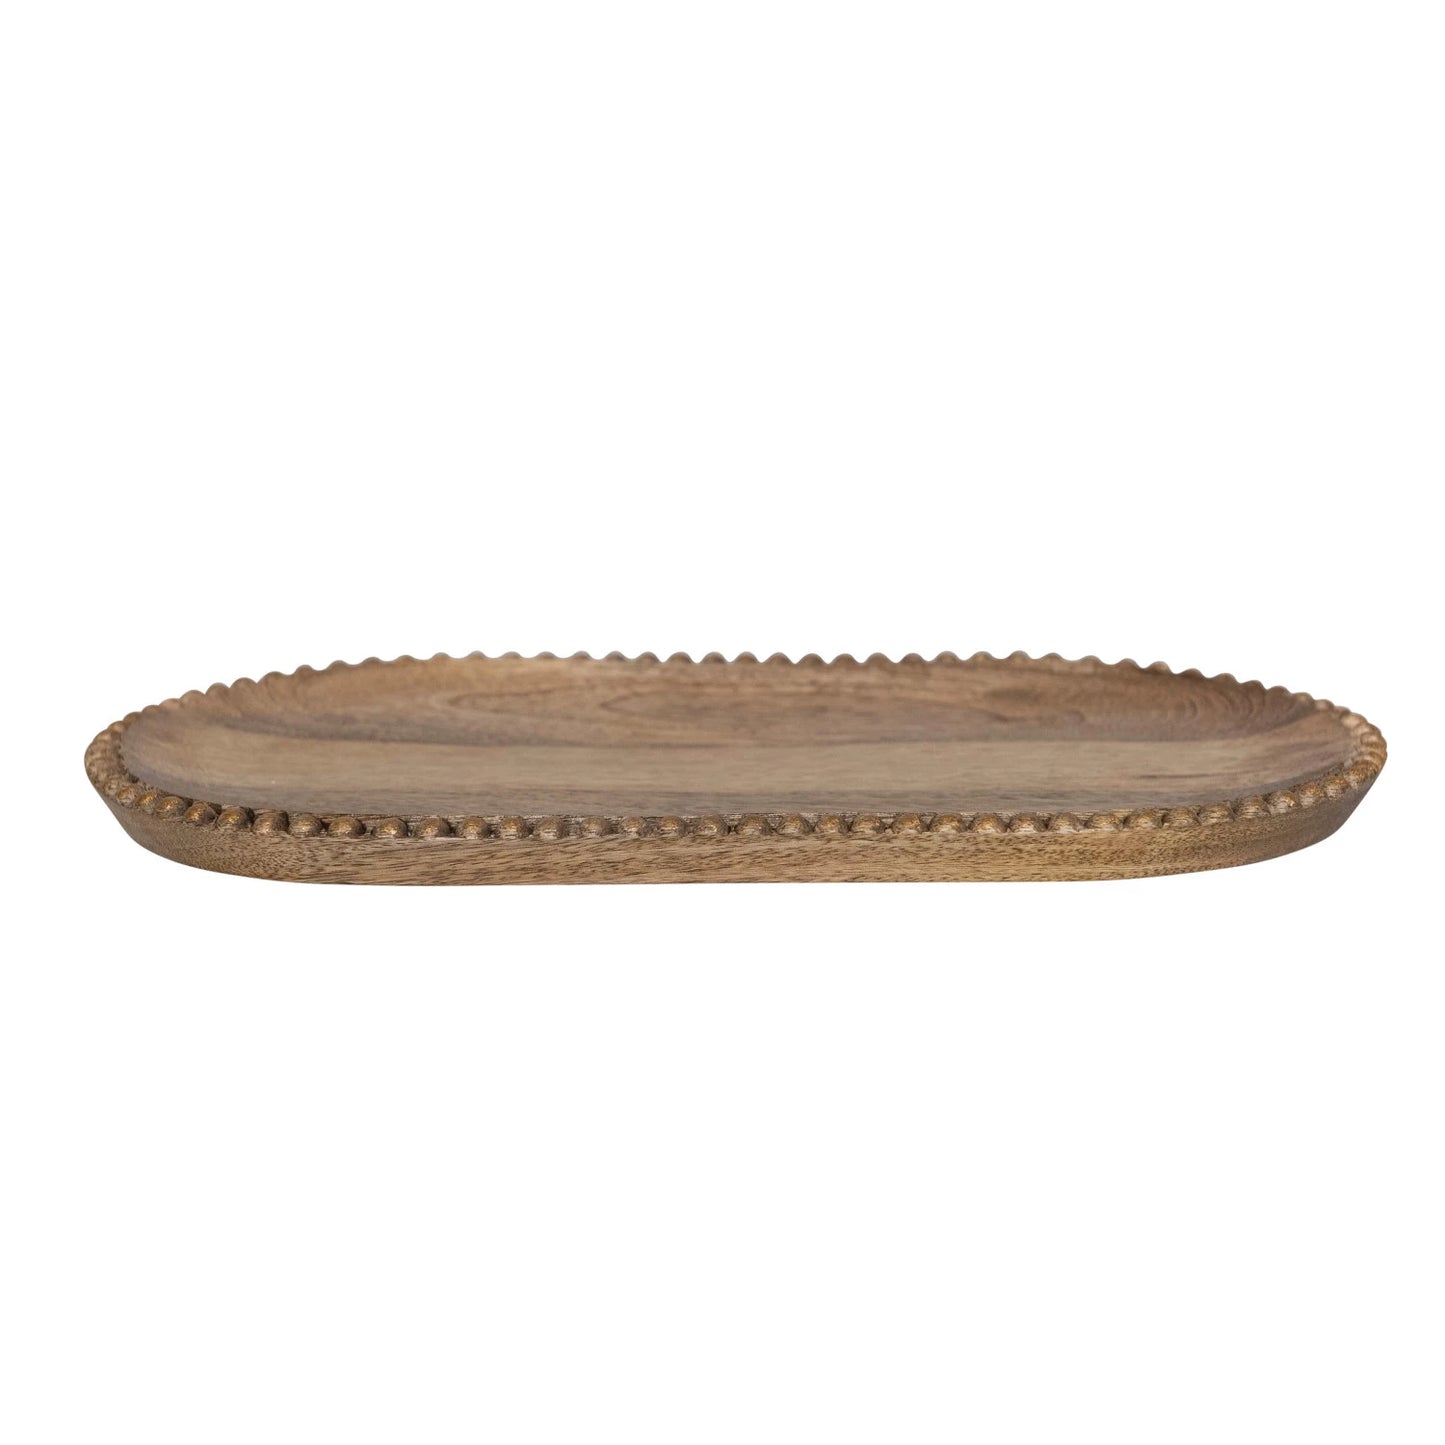 HAND CARVED MANGO WOOD TRAY WITH WOOD BEADS AND GOLD FINISH